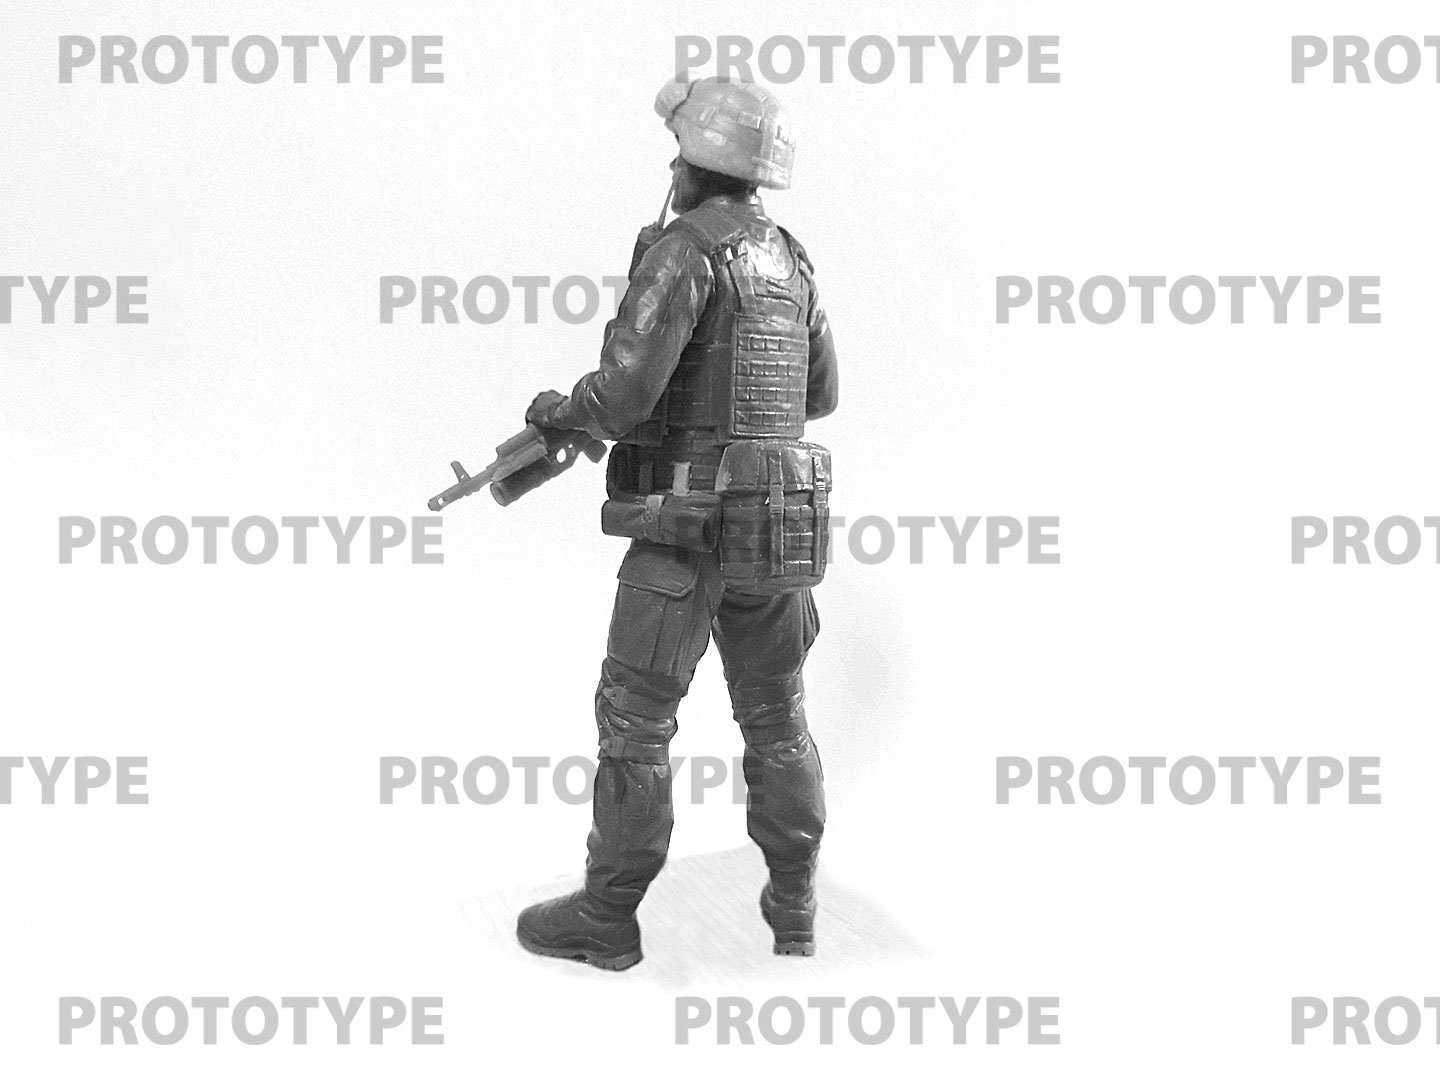 Ukrainian Army Soldier made with real LEGO® Minifigure